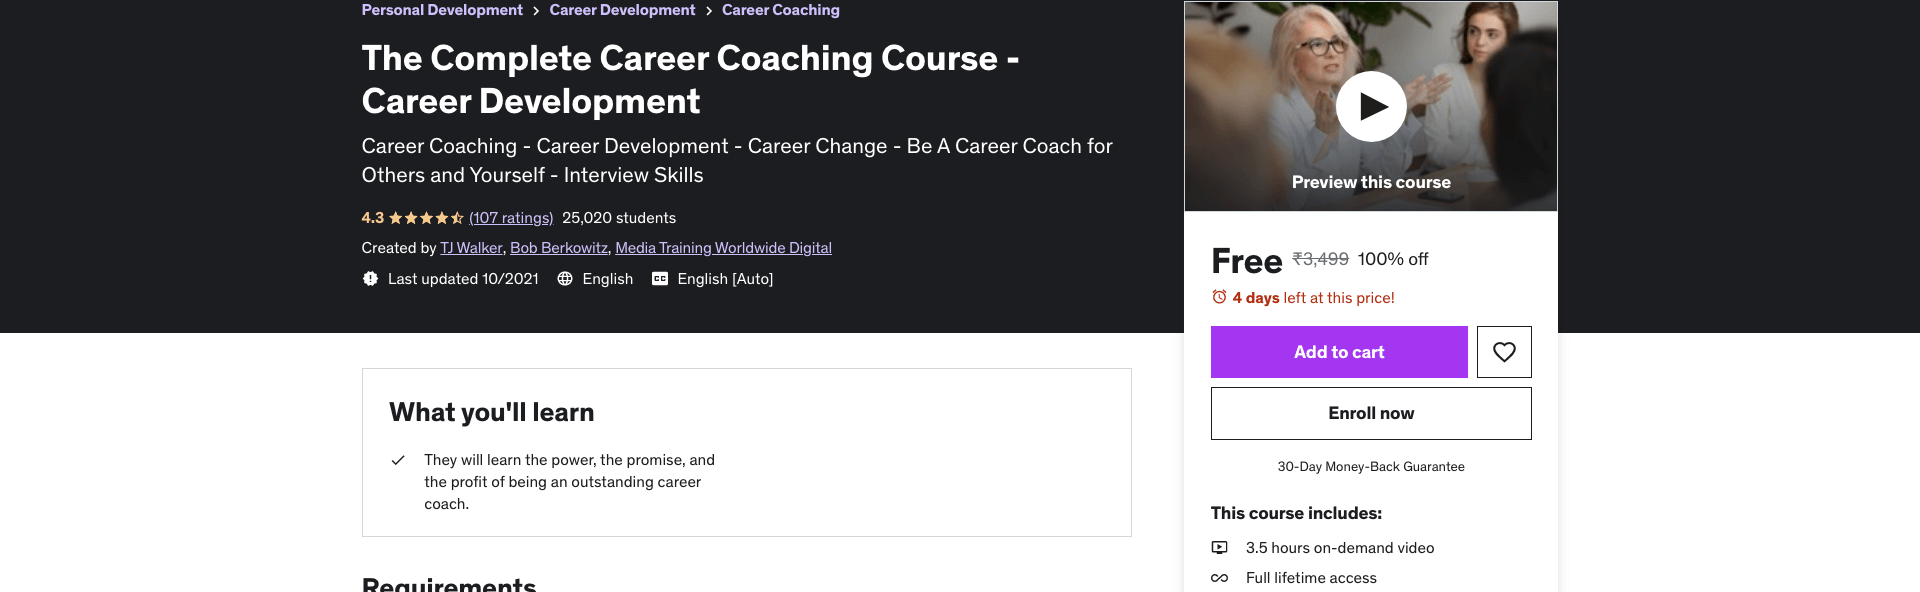 The Complete Career Coaching Course - Career Development